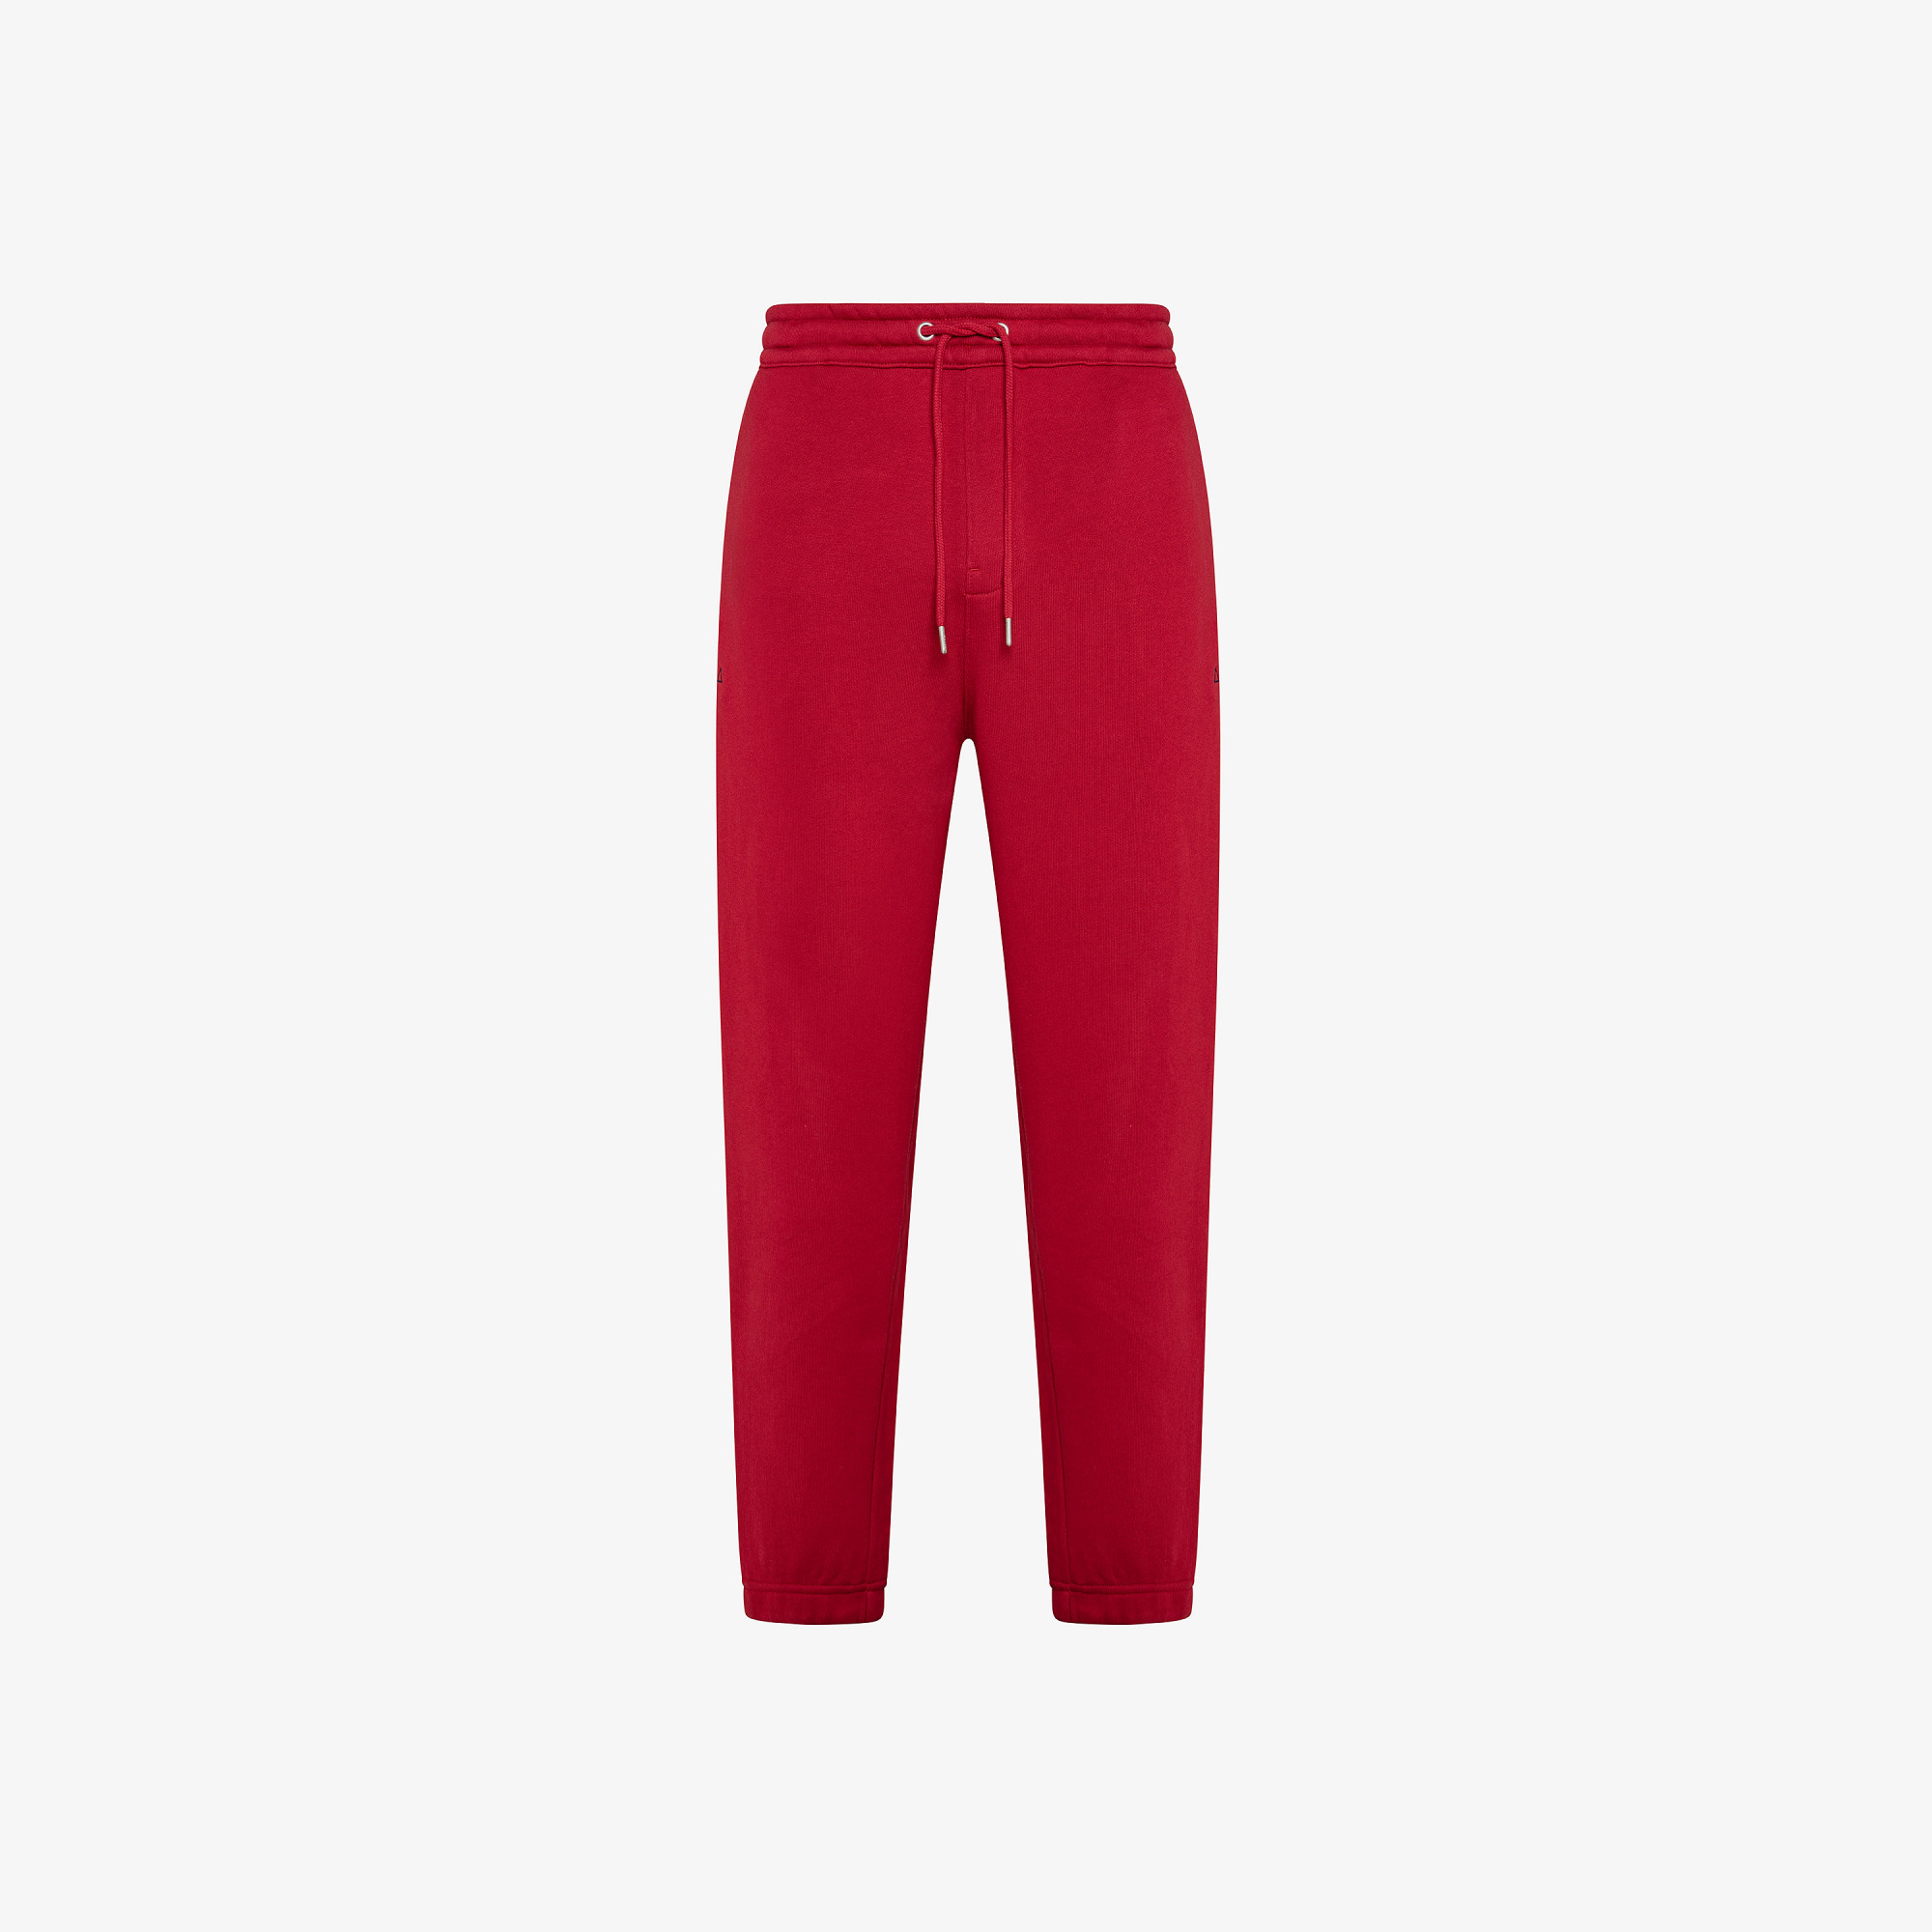 PANT LONG COTTON FL ROSSO FUOCO